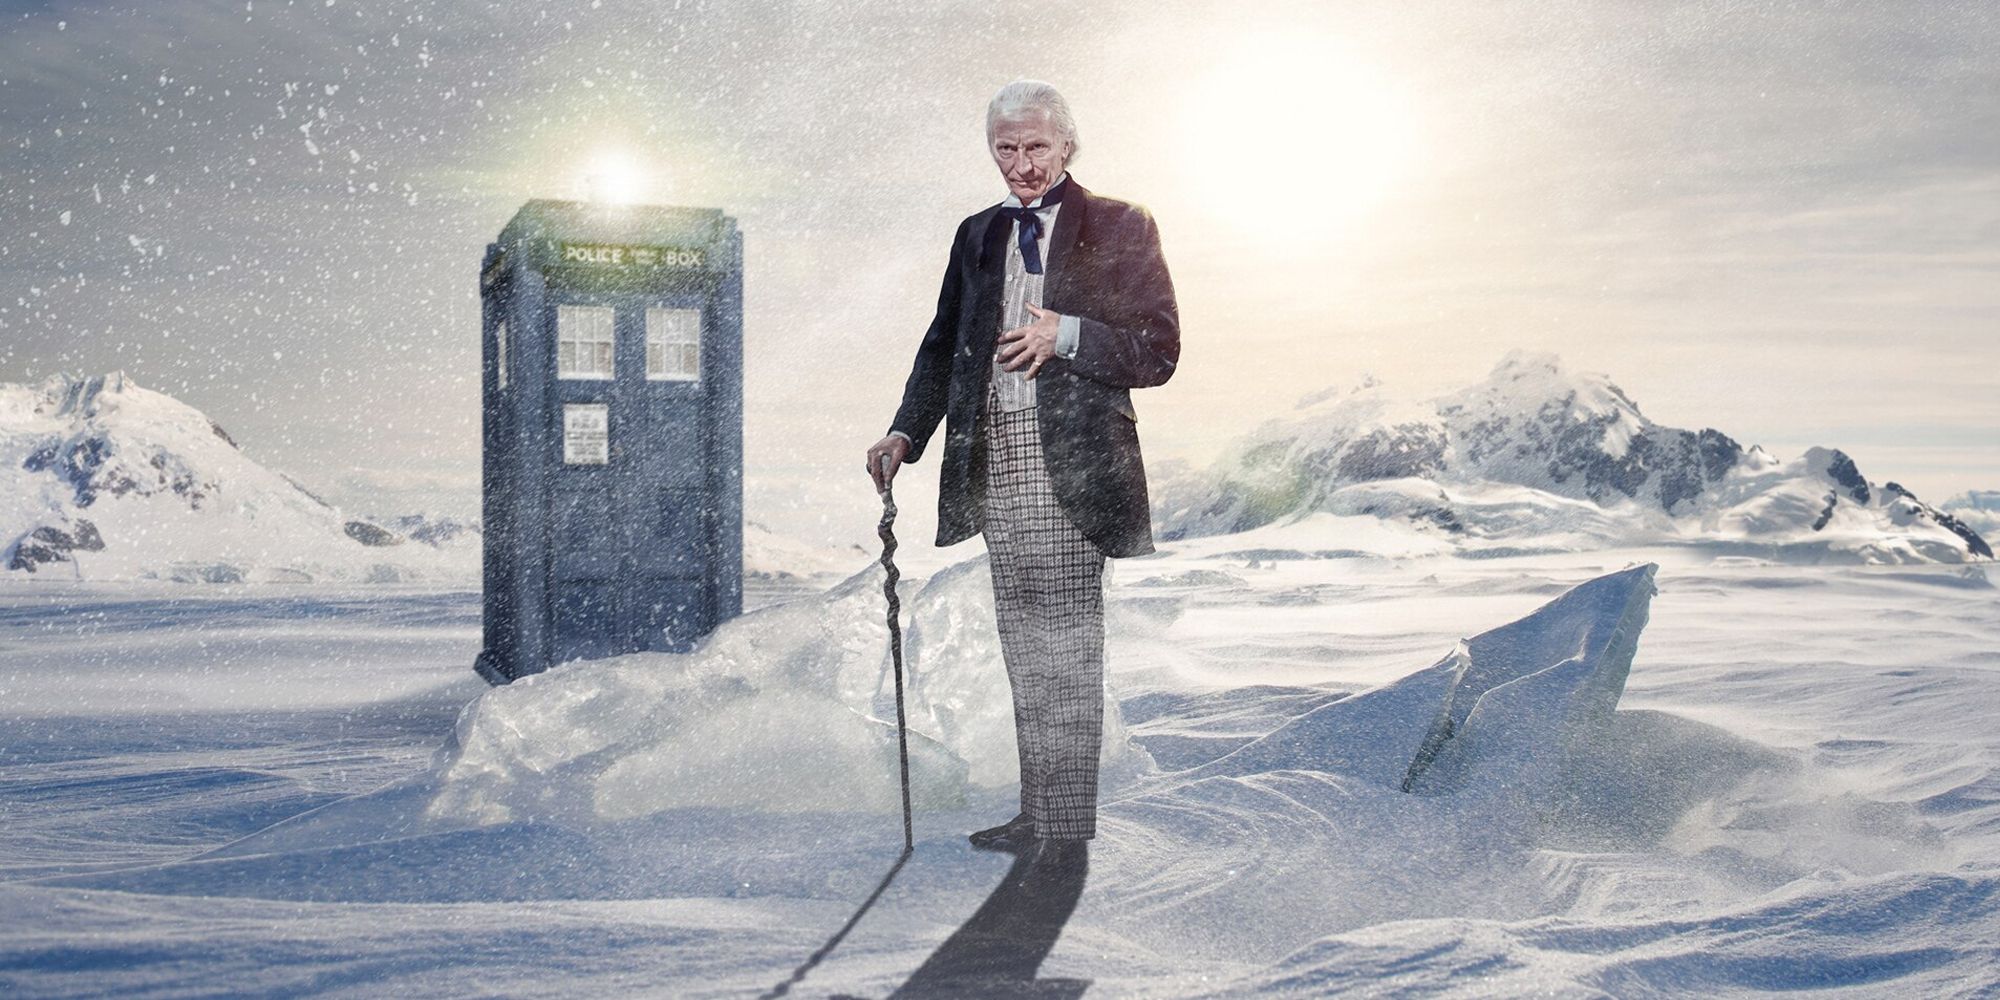 First Doctor standing in a snowy region in front of the Tardis